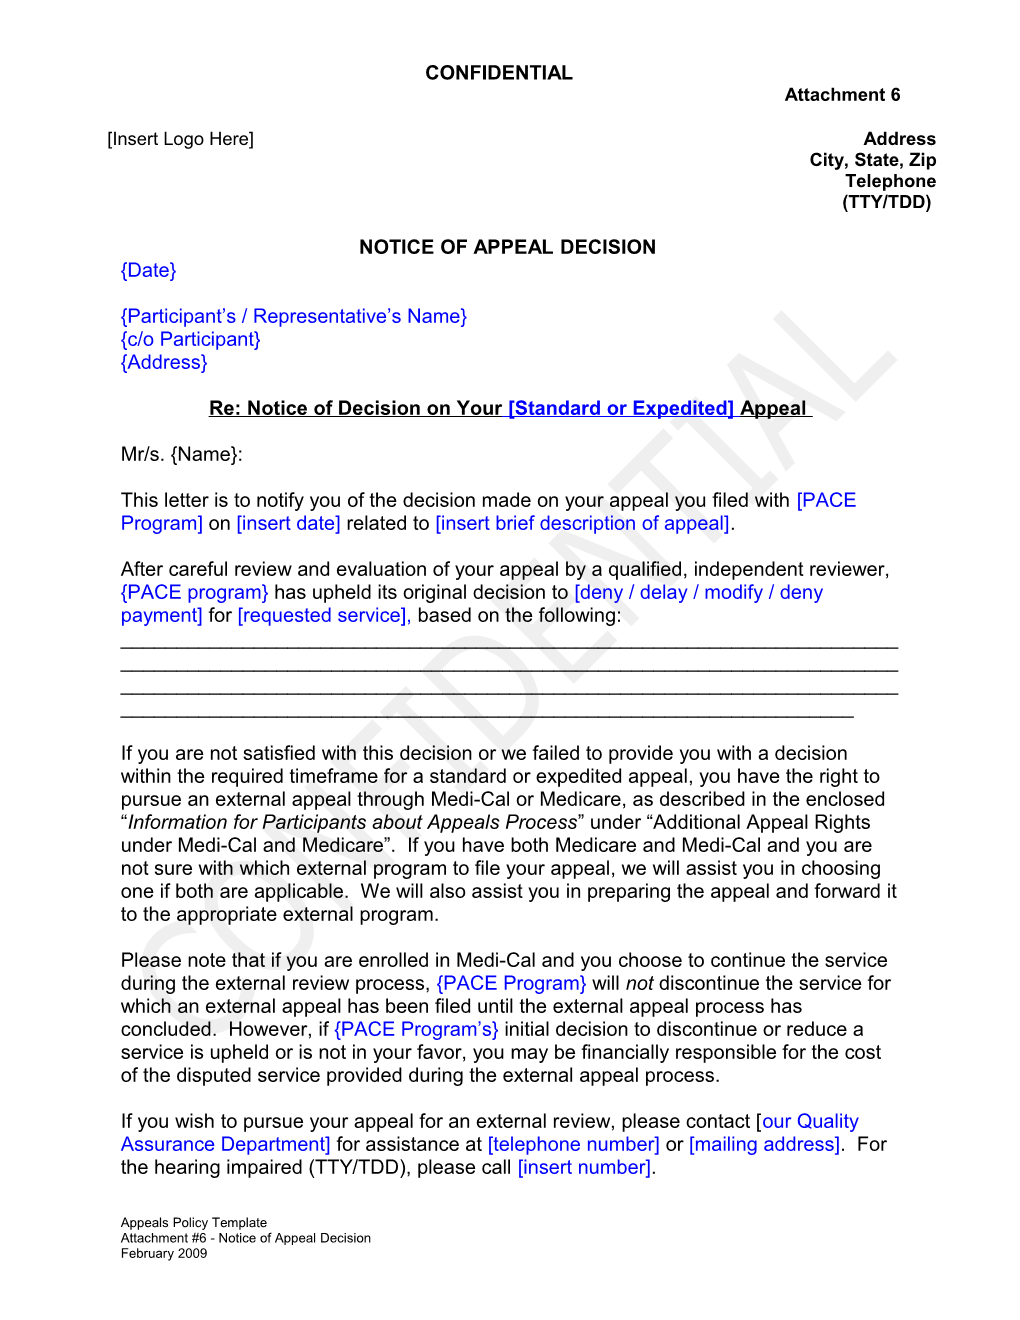 Attachment 6 - Notice of Appeal Decision